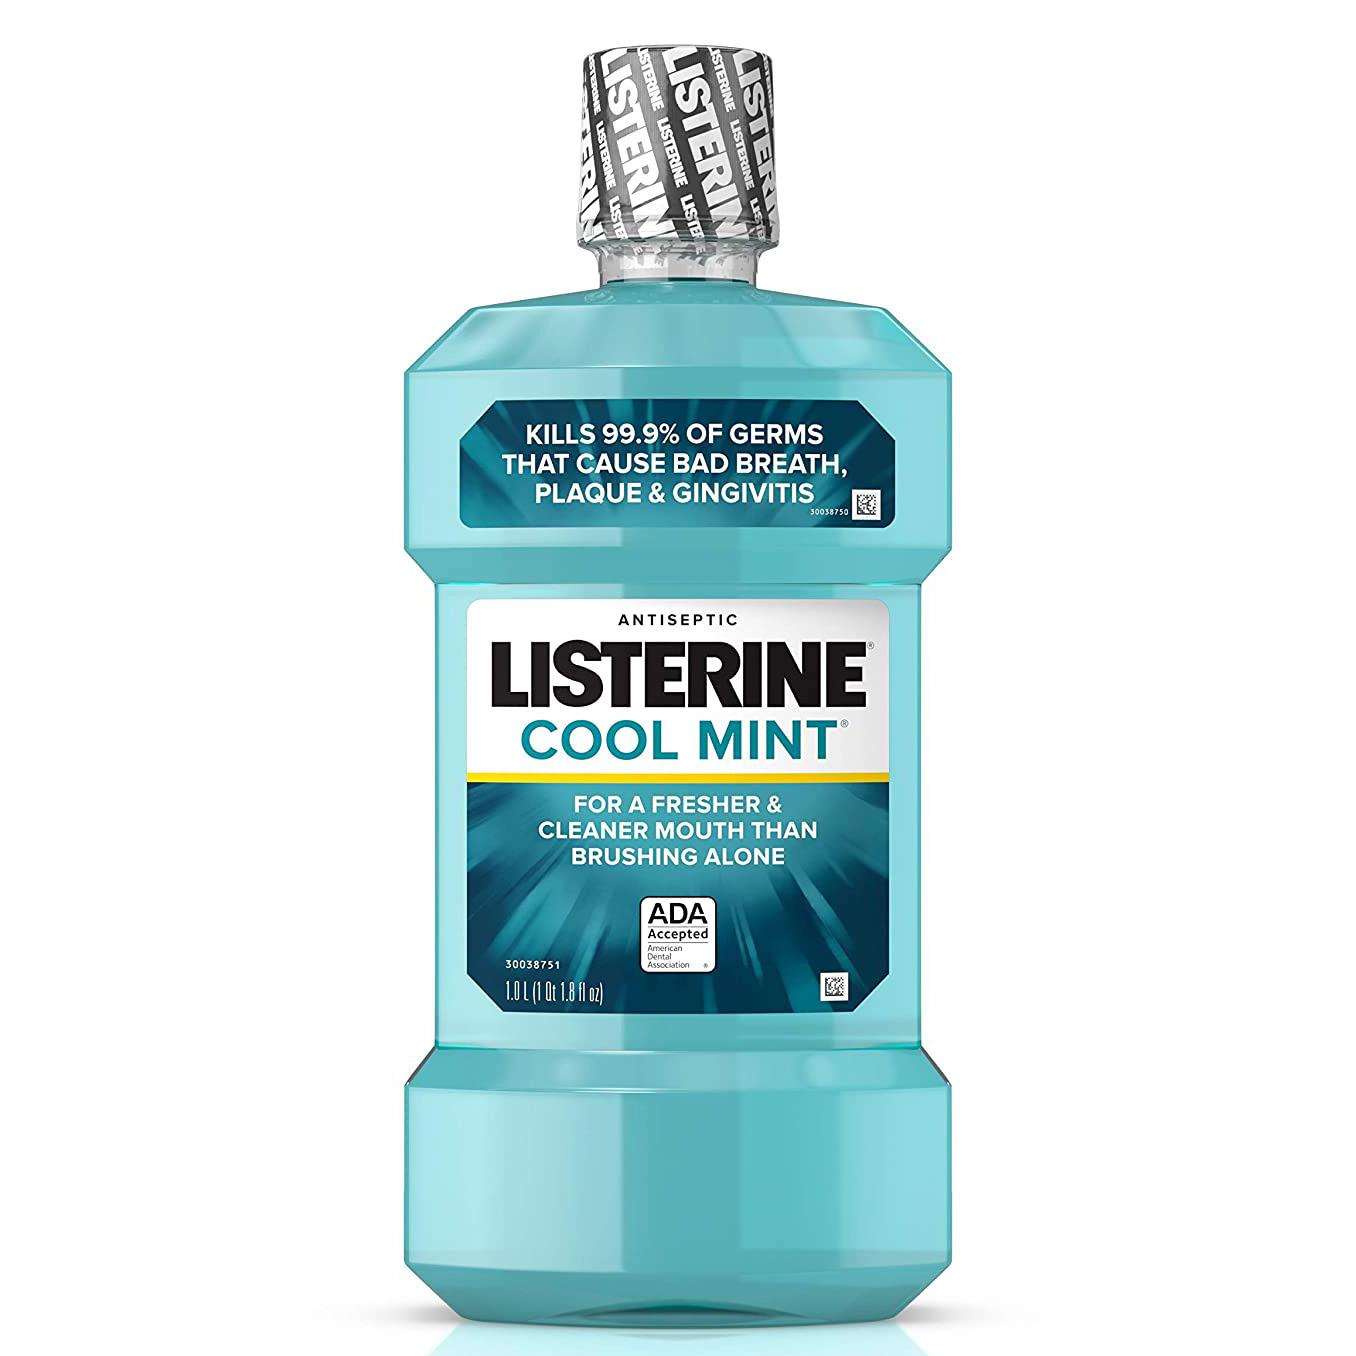 3L Listerine Antiseptic Mouthwash for $10.30 Shipped